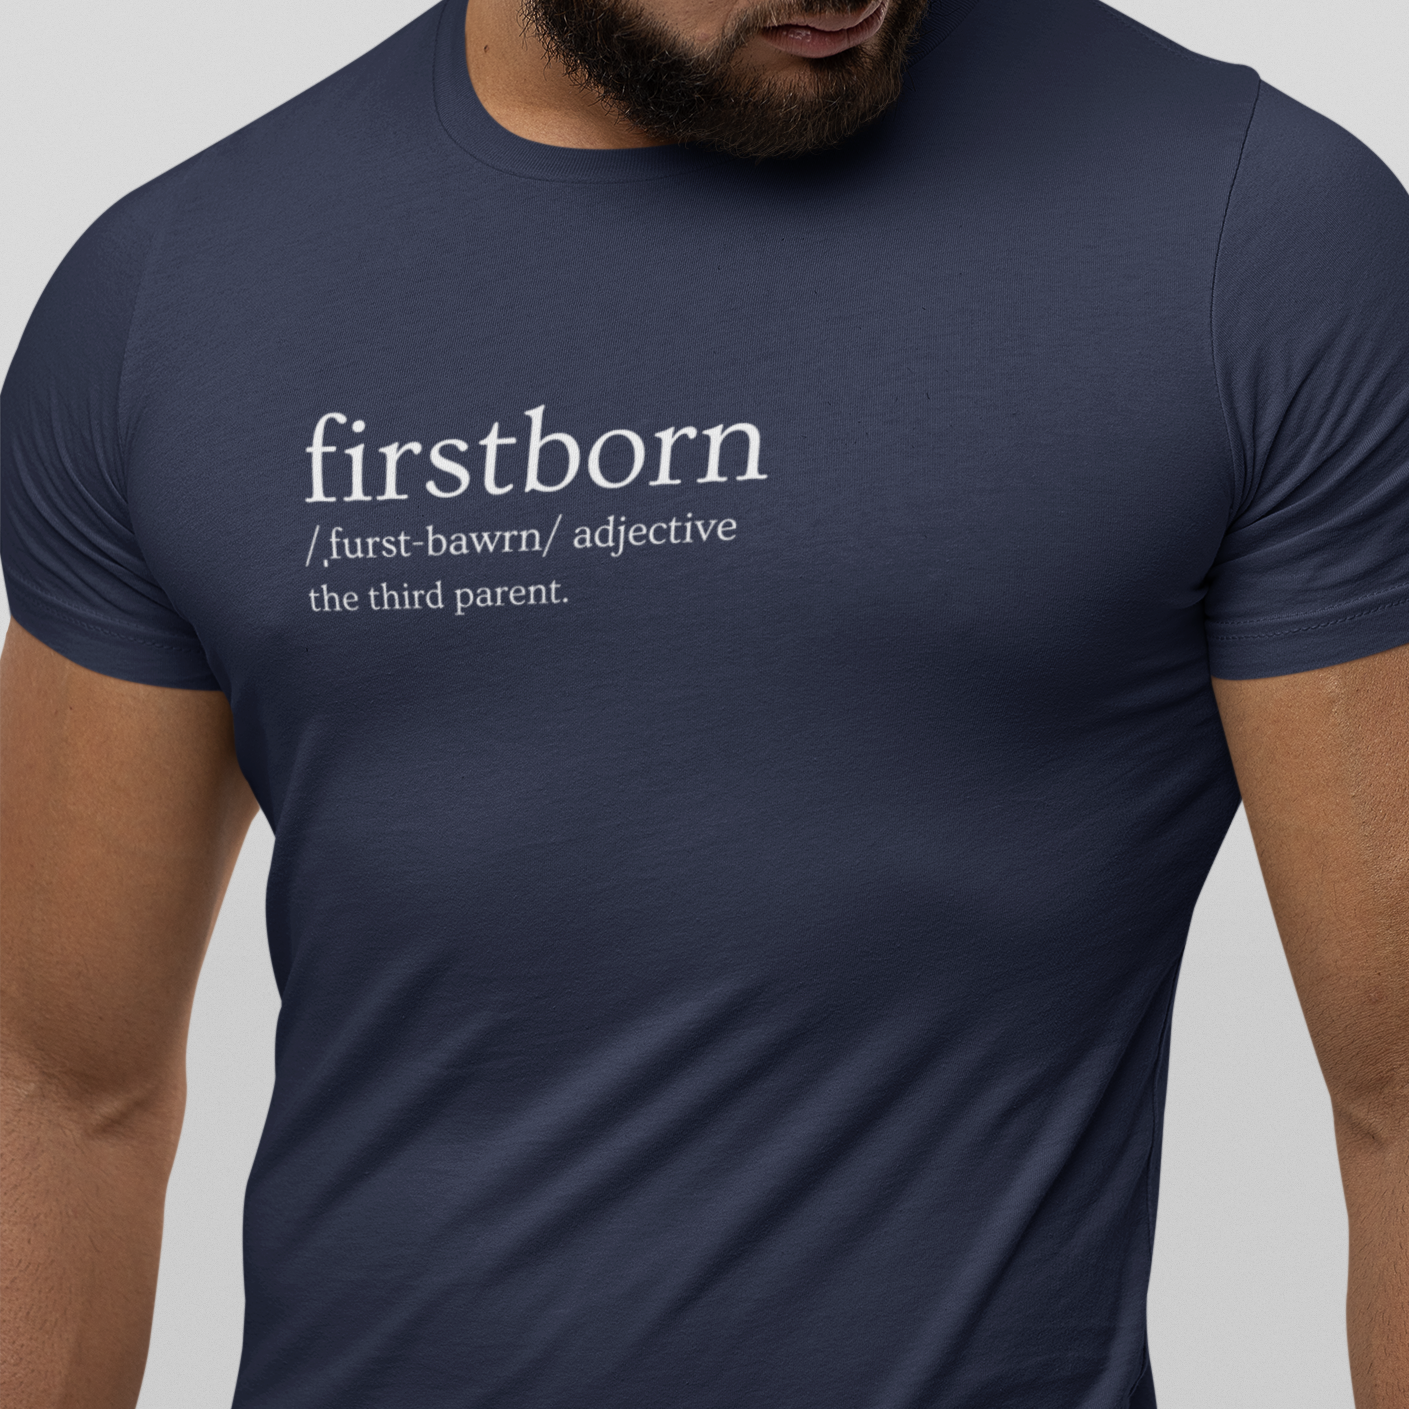 firstborn-the-third-parent-black-t-shirt-mockup-of-a-bearded-man-wearing-a-unisex-short-sleeve-tee-from-bella-canvas